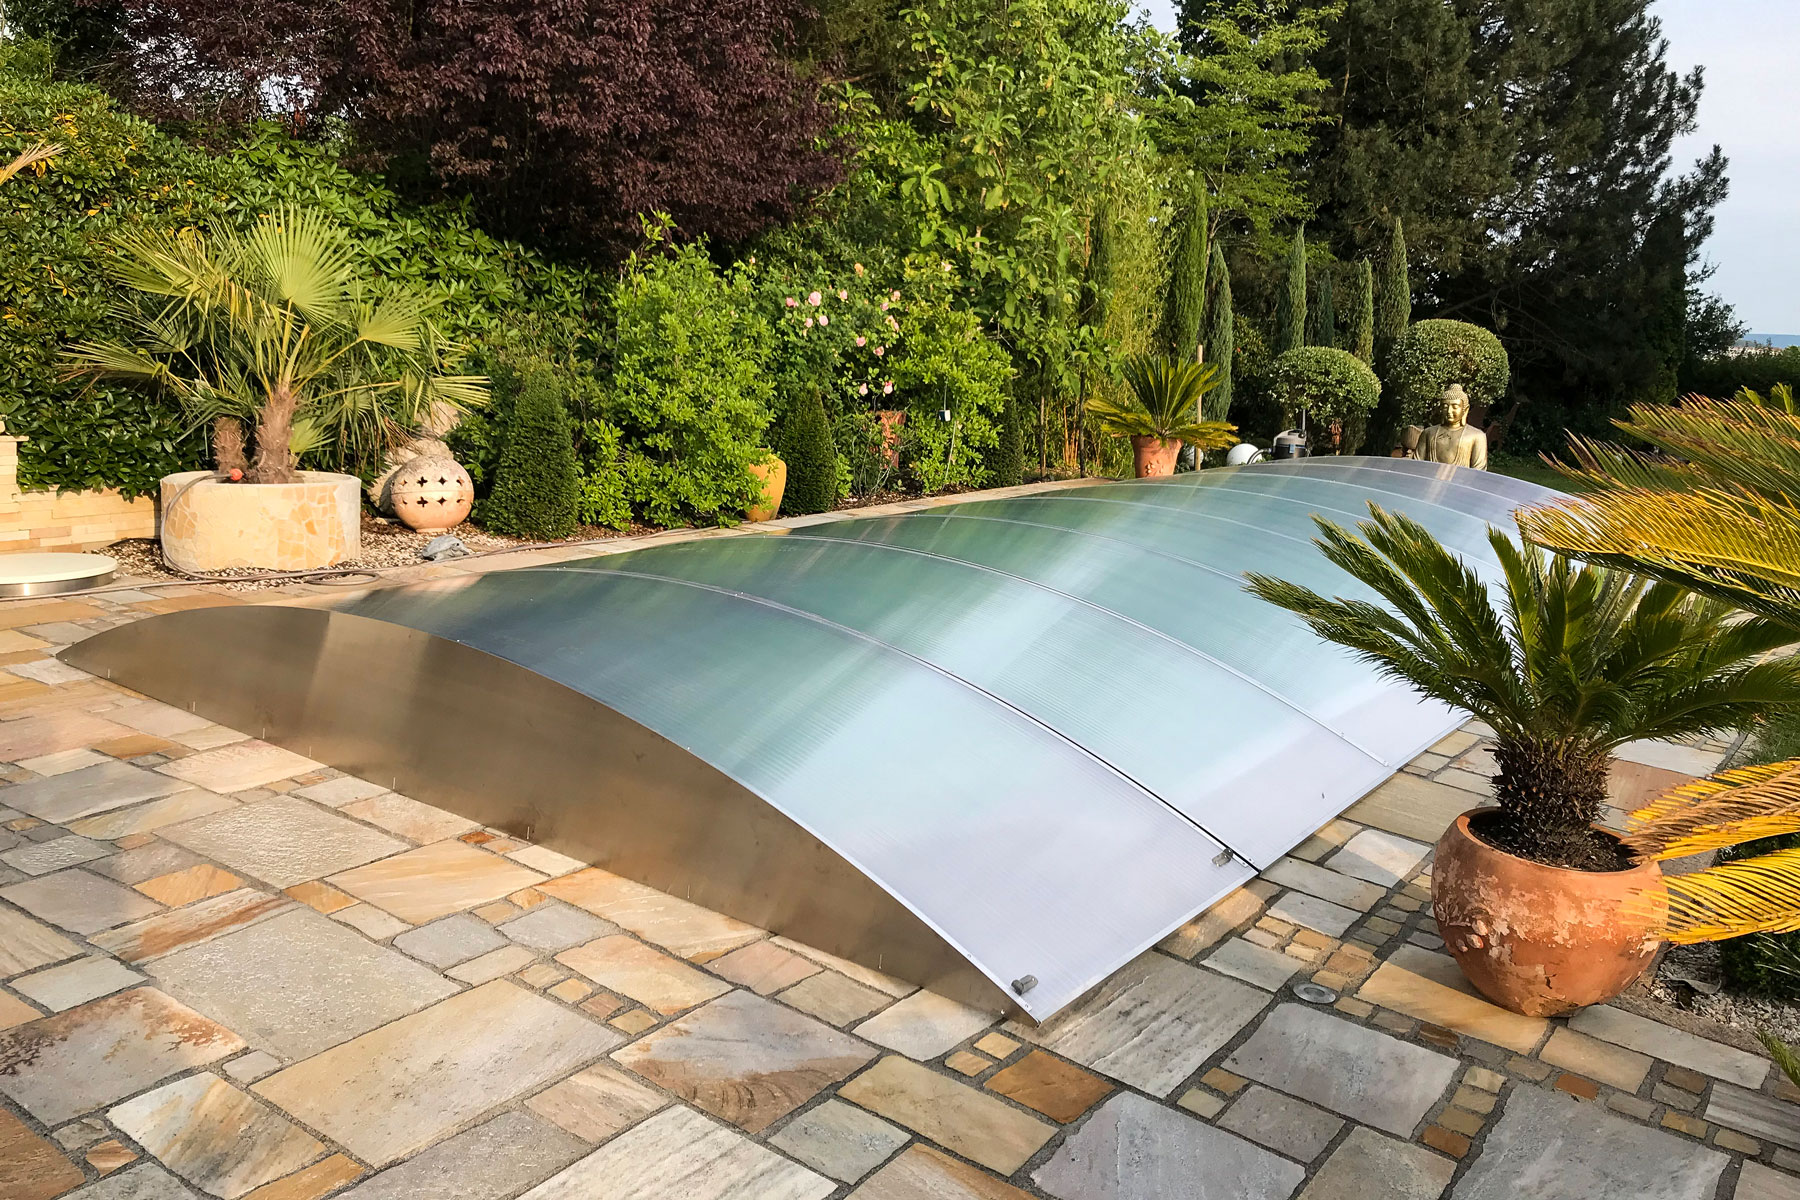 FlexiRoof pool enclosures, covers are slim, no rail system necessary, simple and completely removable